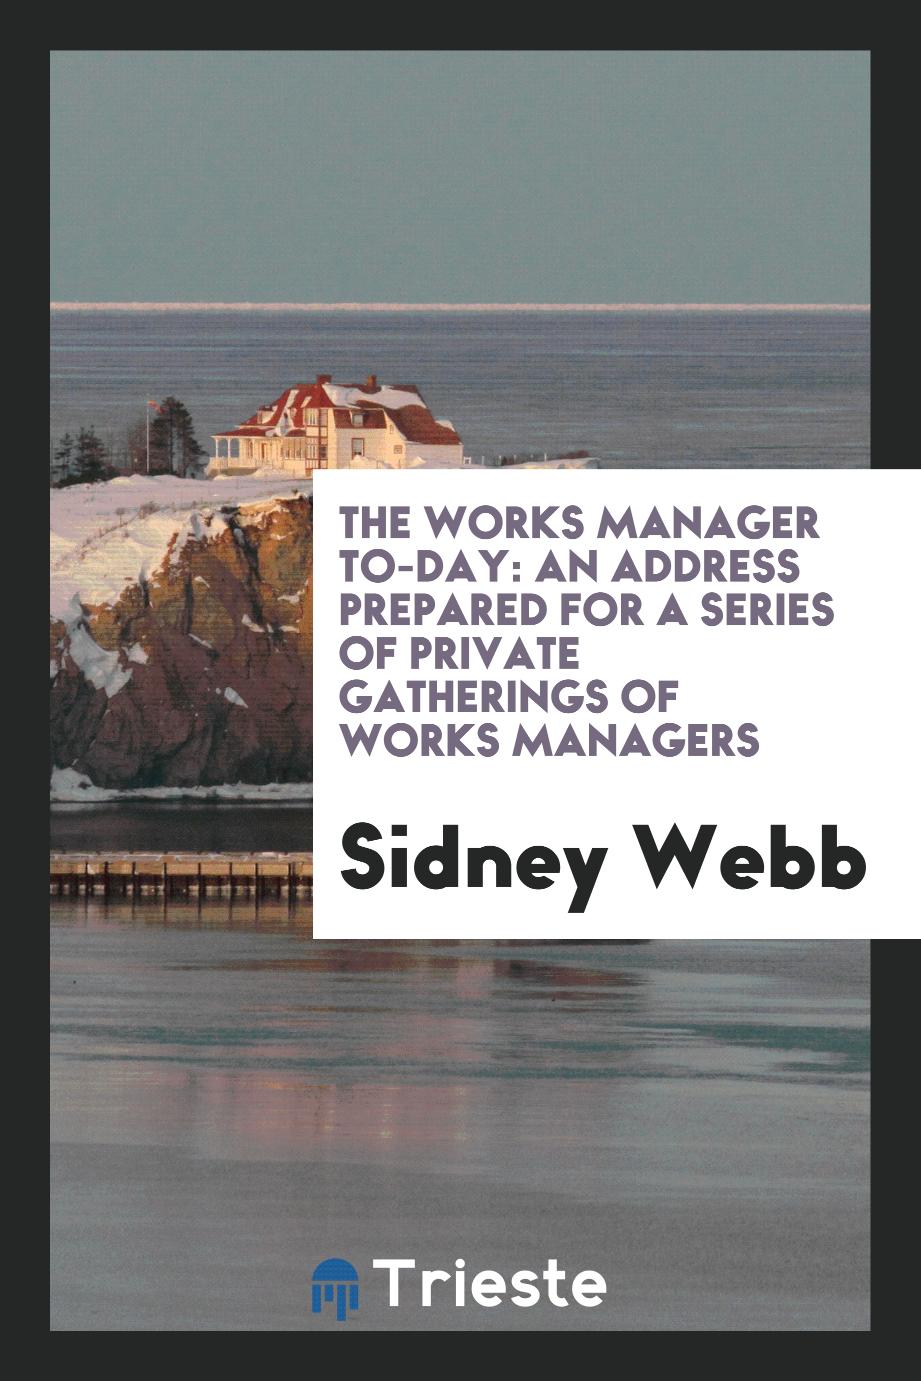 The Works Manager To-Day: An Address Prepared for a Series of Private Gatherings of Works Managers